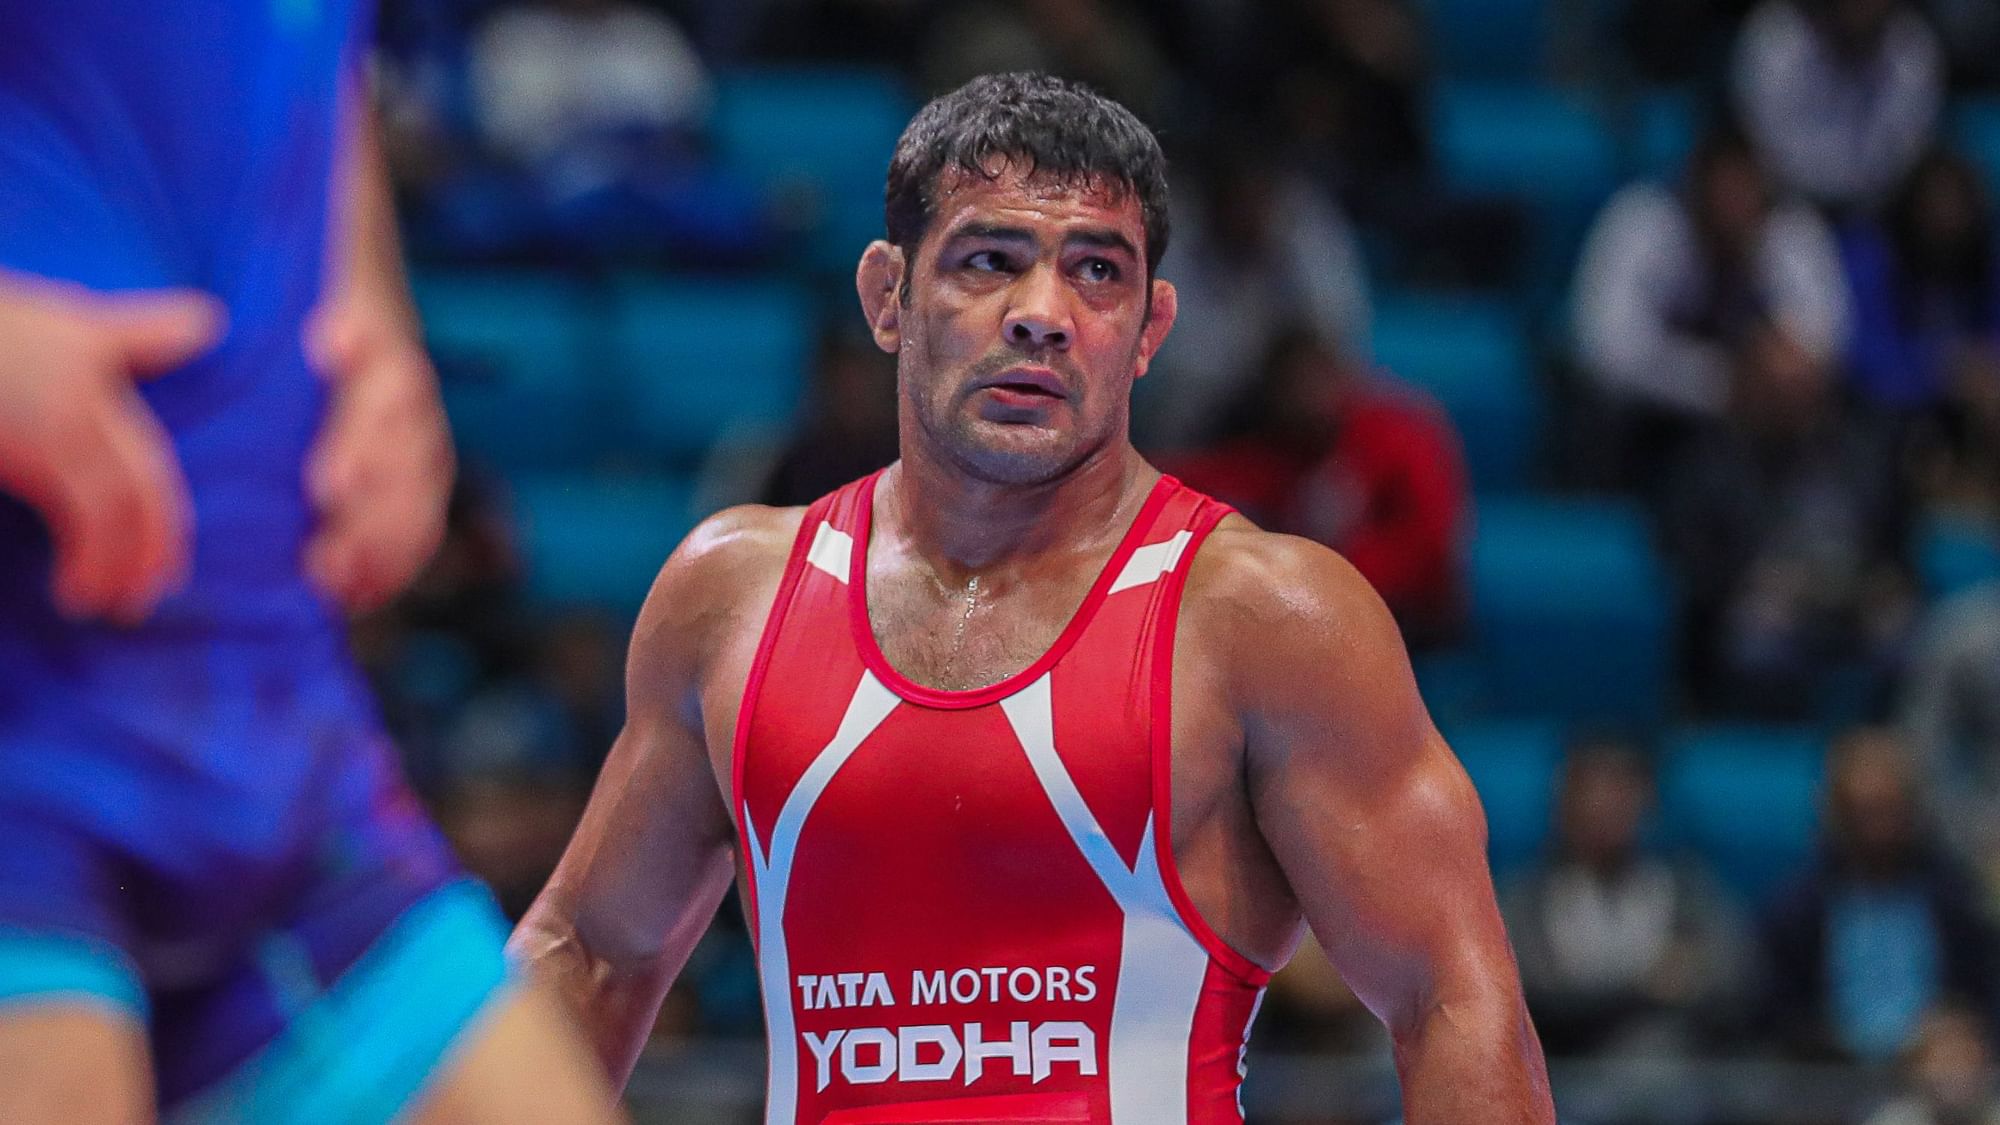 Sushil Kumar’s rival Jitender Kumar won the 74kg trial to qualify for the season-opener in Italy and the Asian Championship in Delhi.